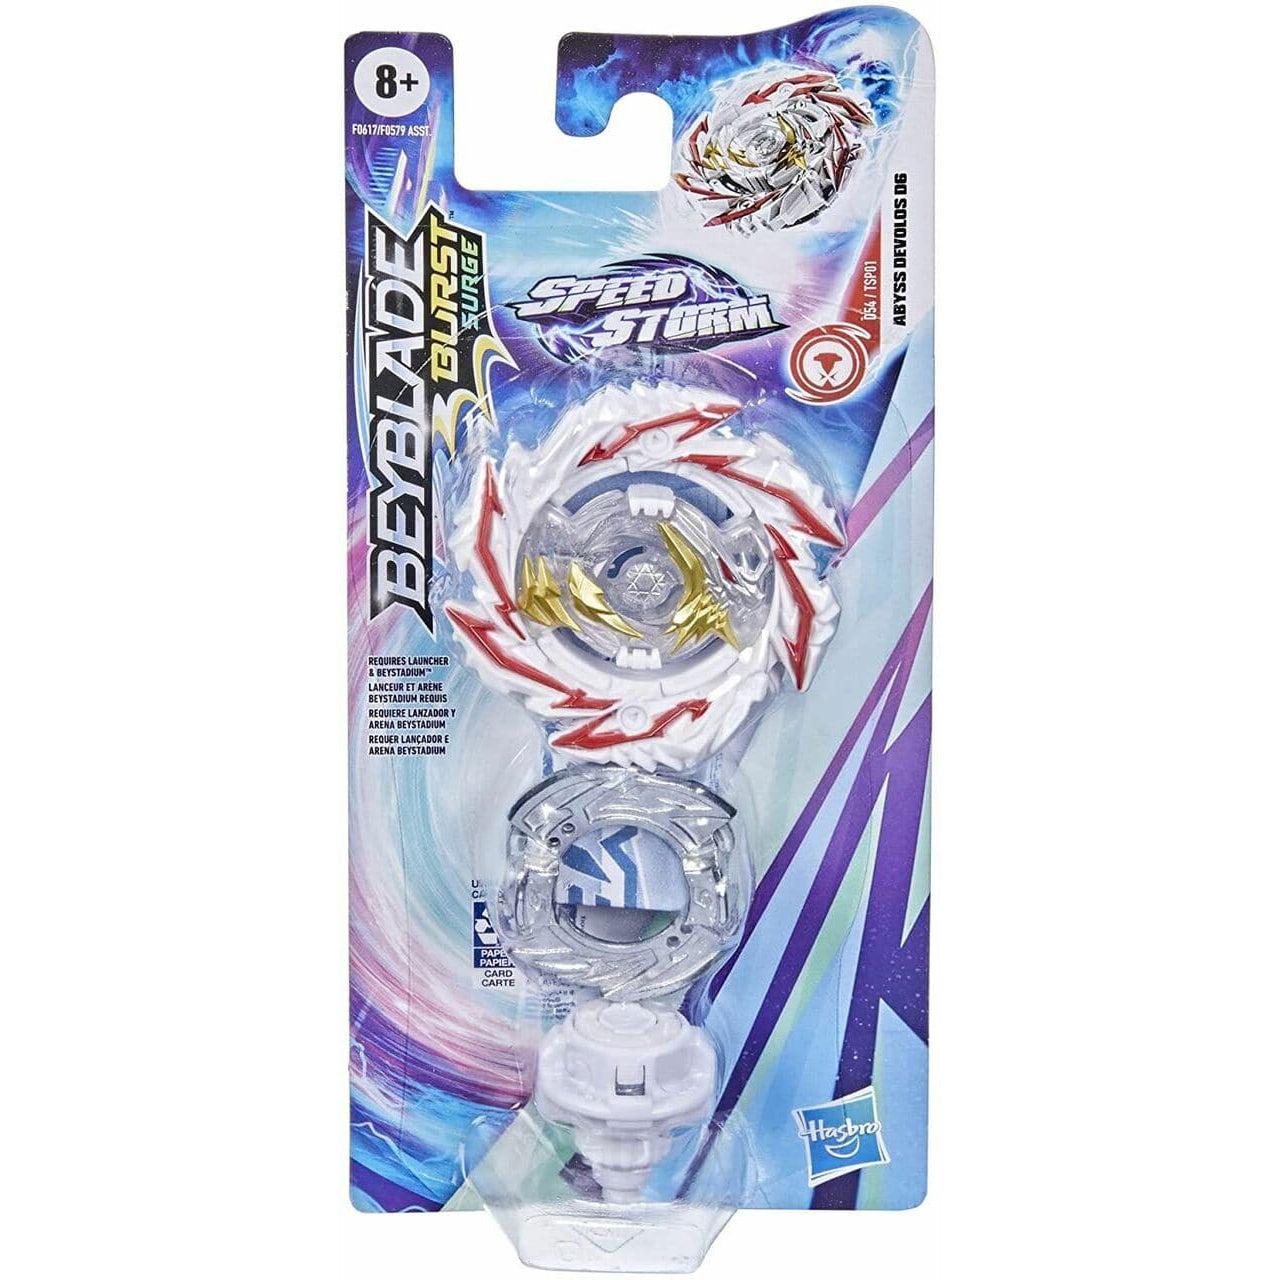 Hasbro-Beyblade Speedstorm Single Pack Assorted-F0617-Abyss Devolos D6-Legacy Toys